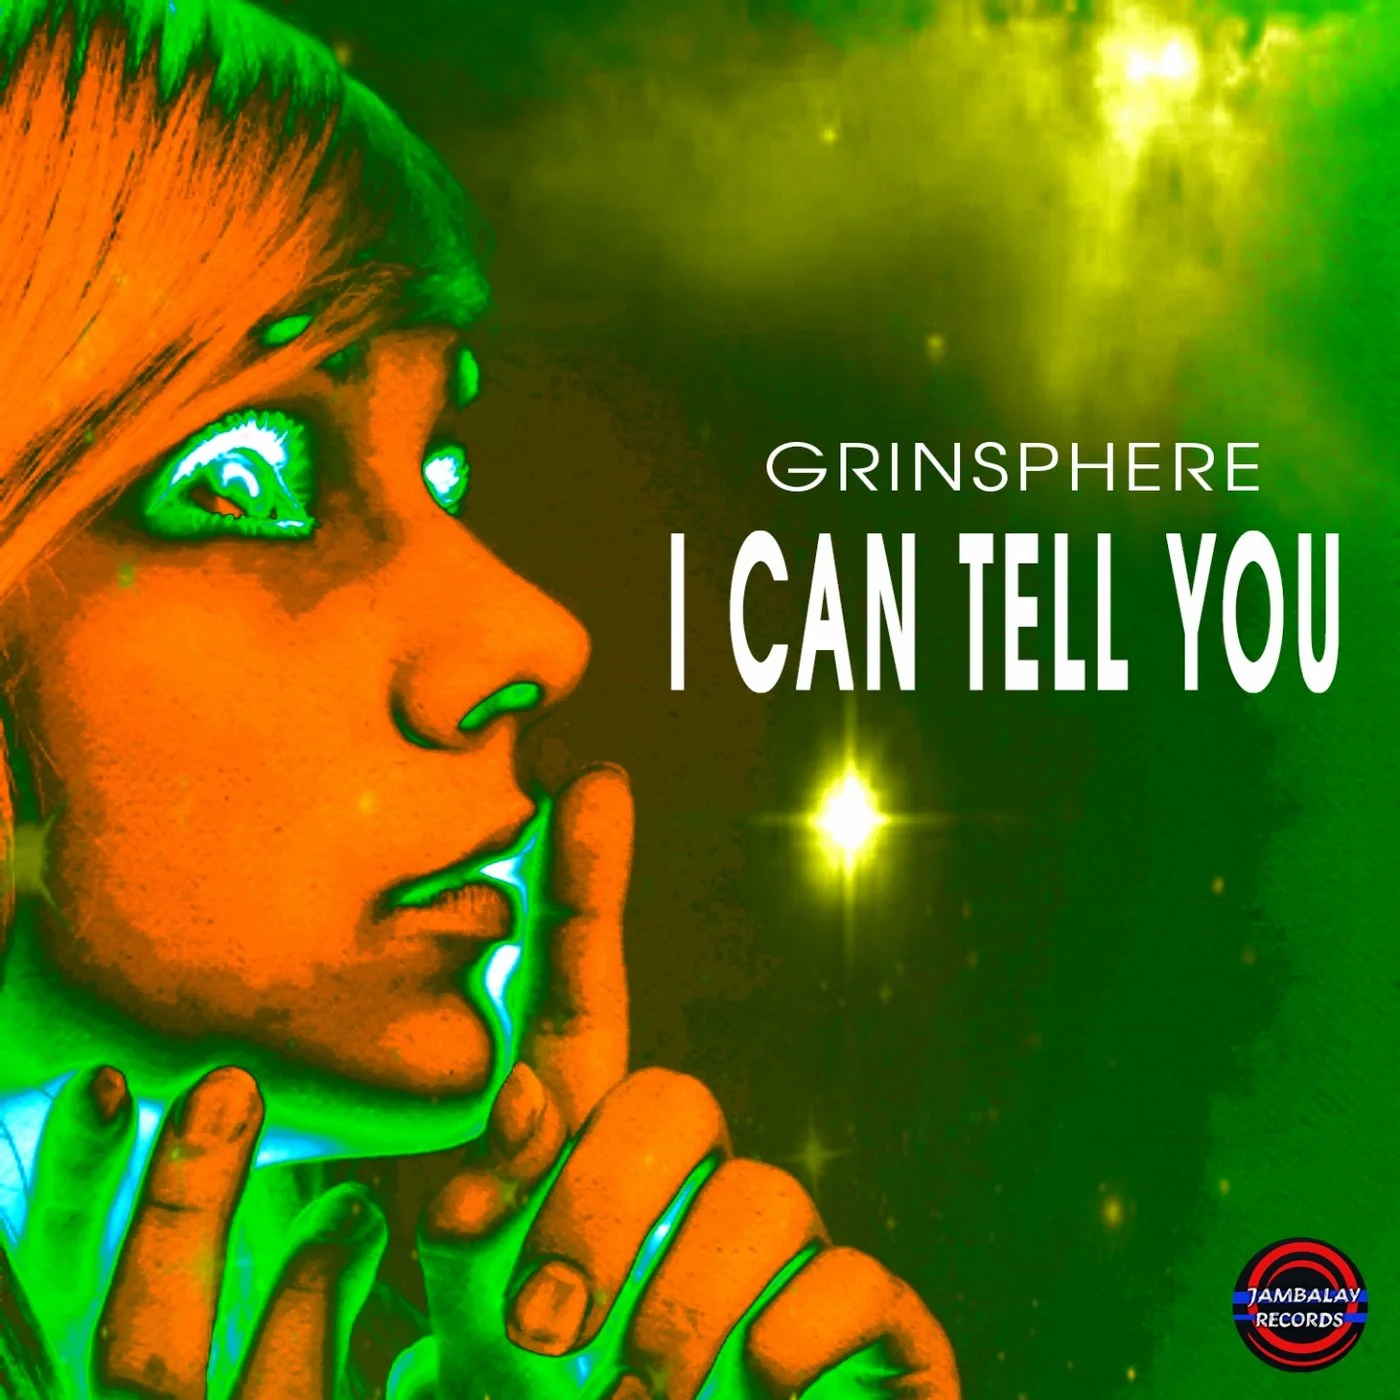 Grinsphere - I can tell you